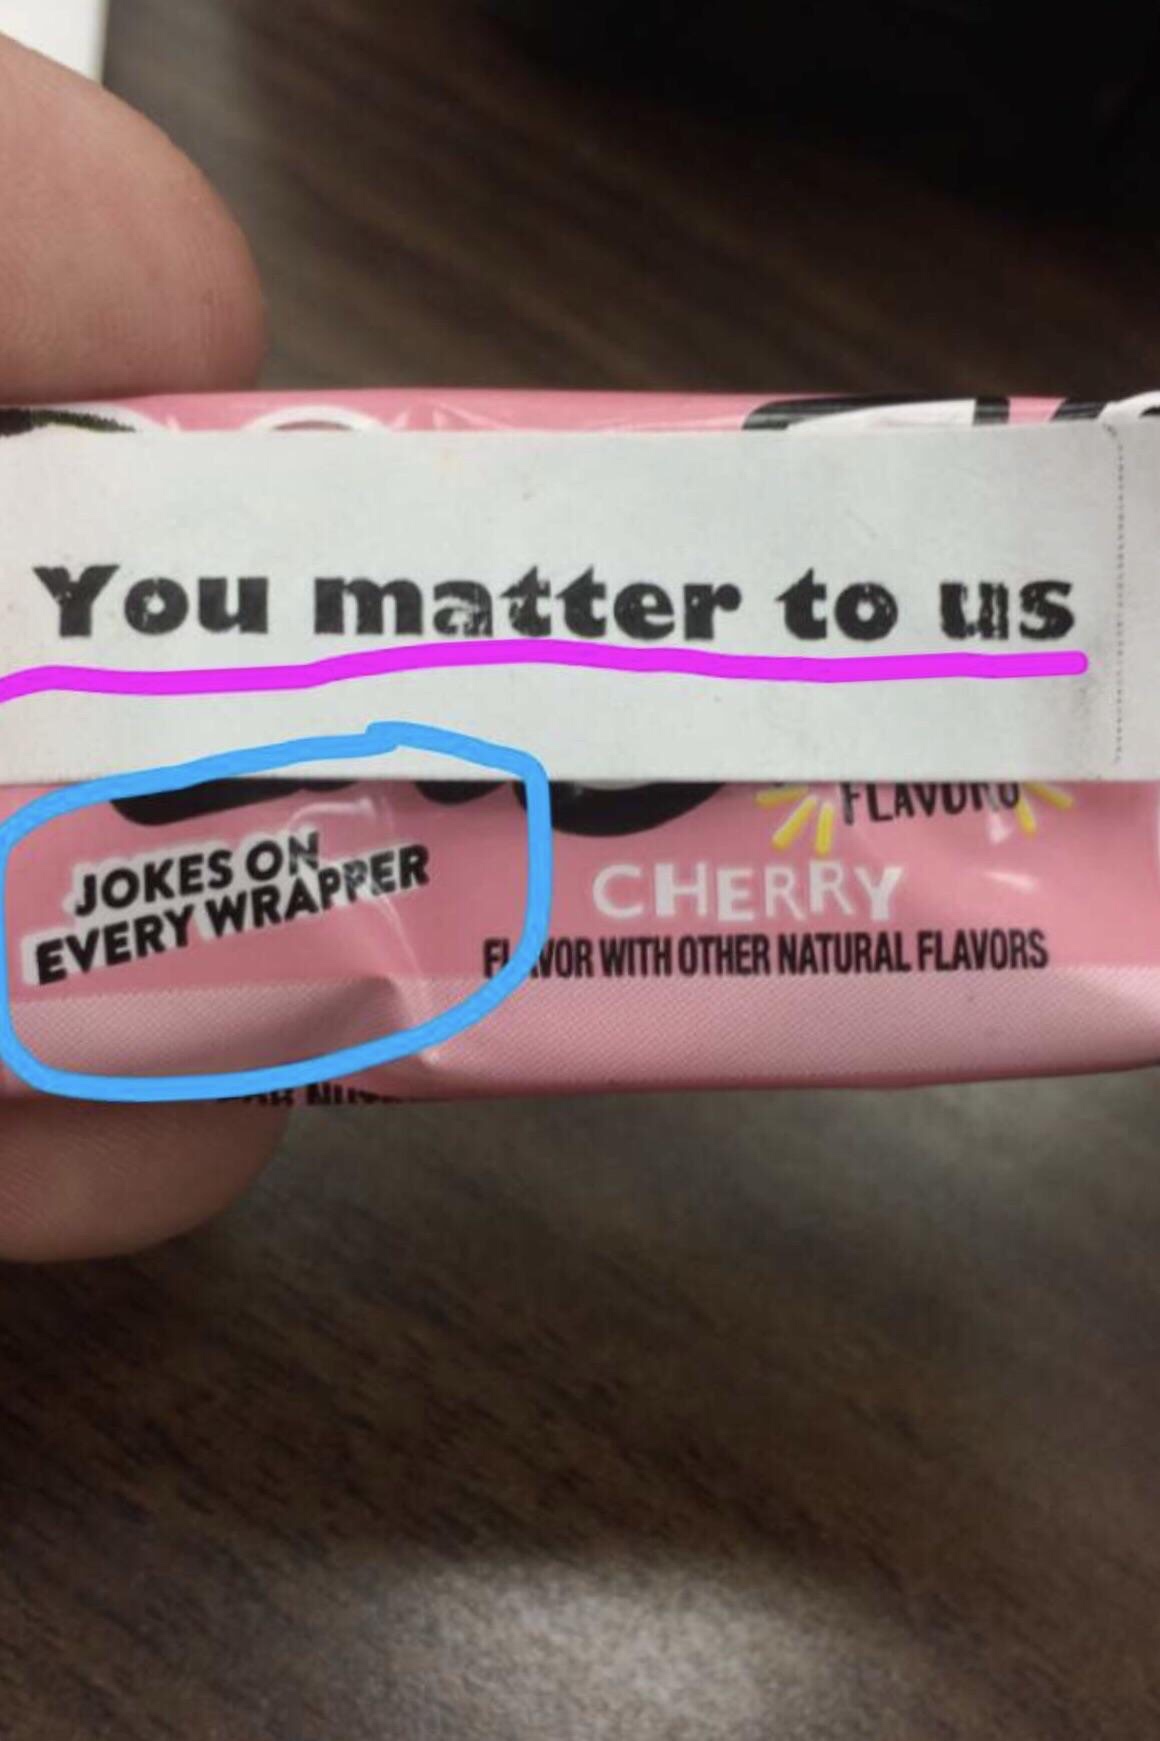 nail - You matter to us Jokes Oneper Flavutu Cherry Vor With Other Natural Flavors Every Wrapper